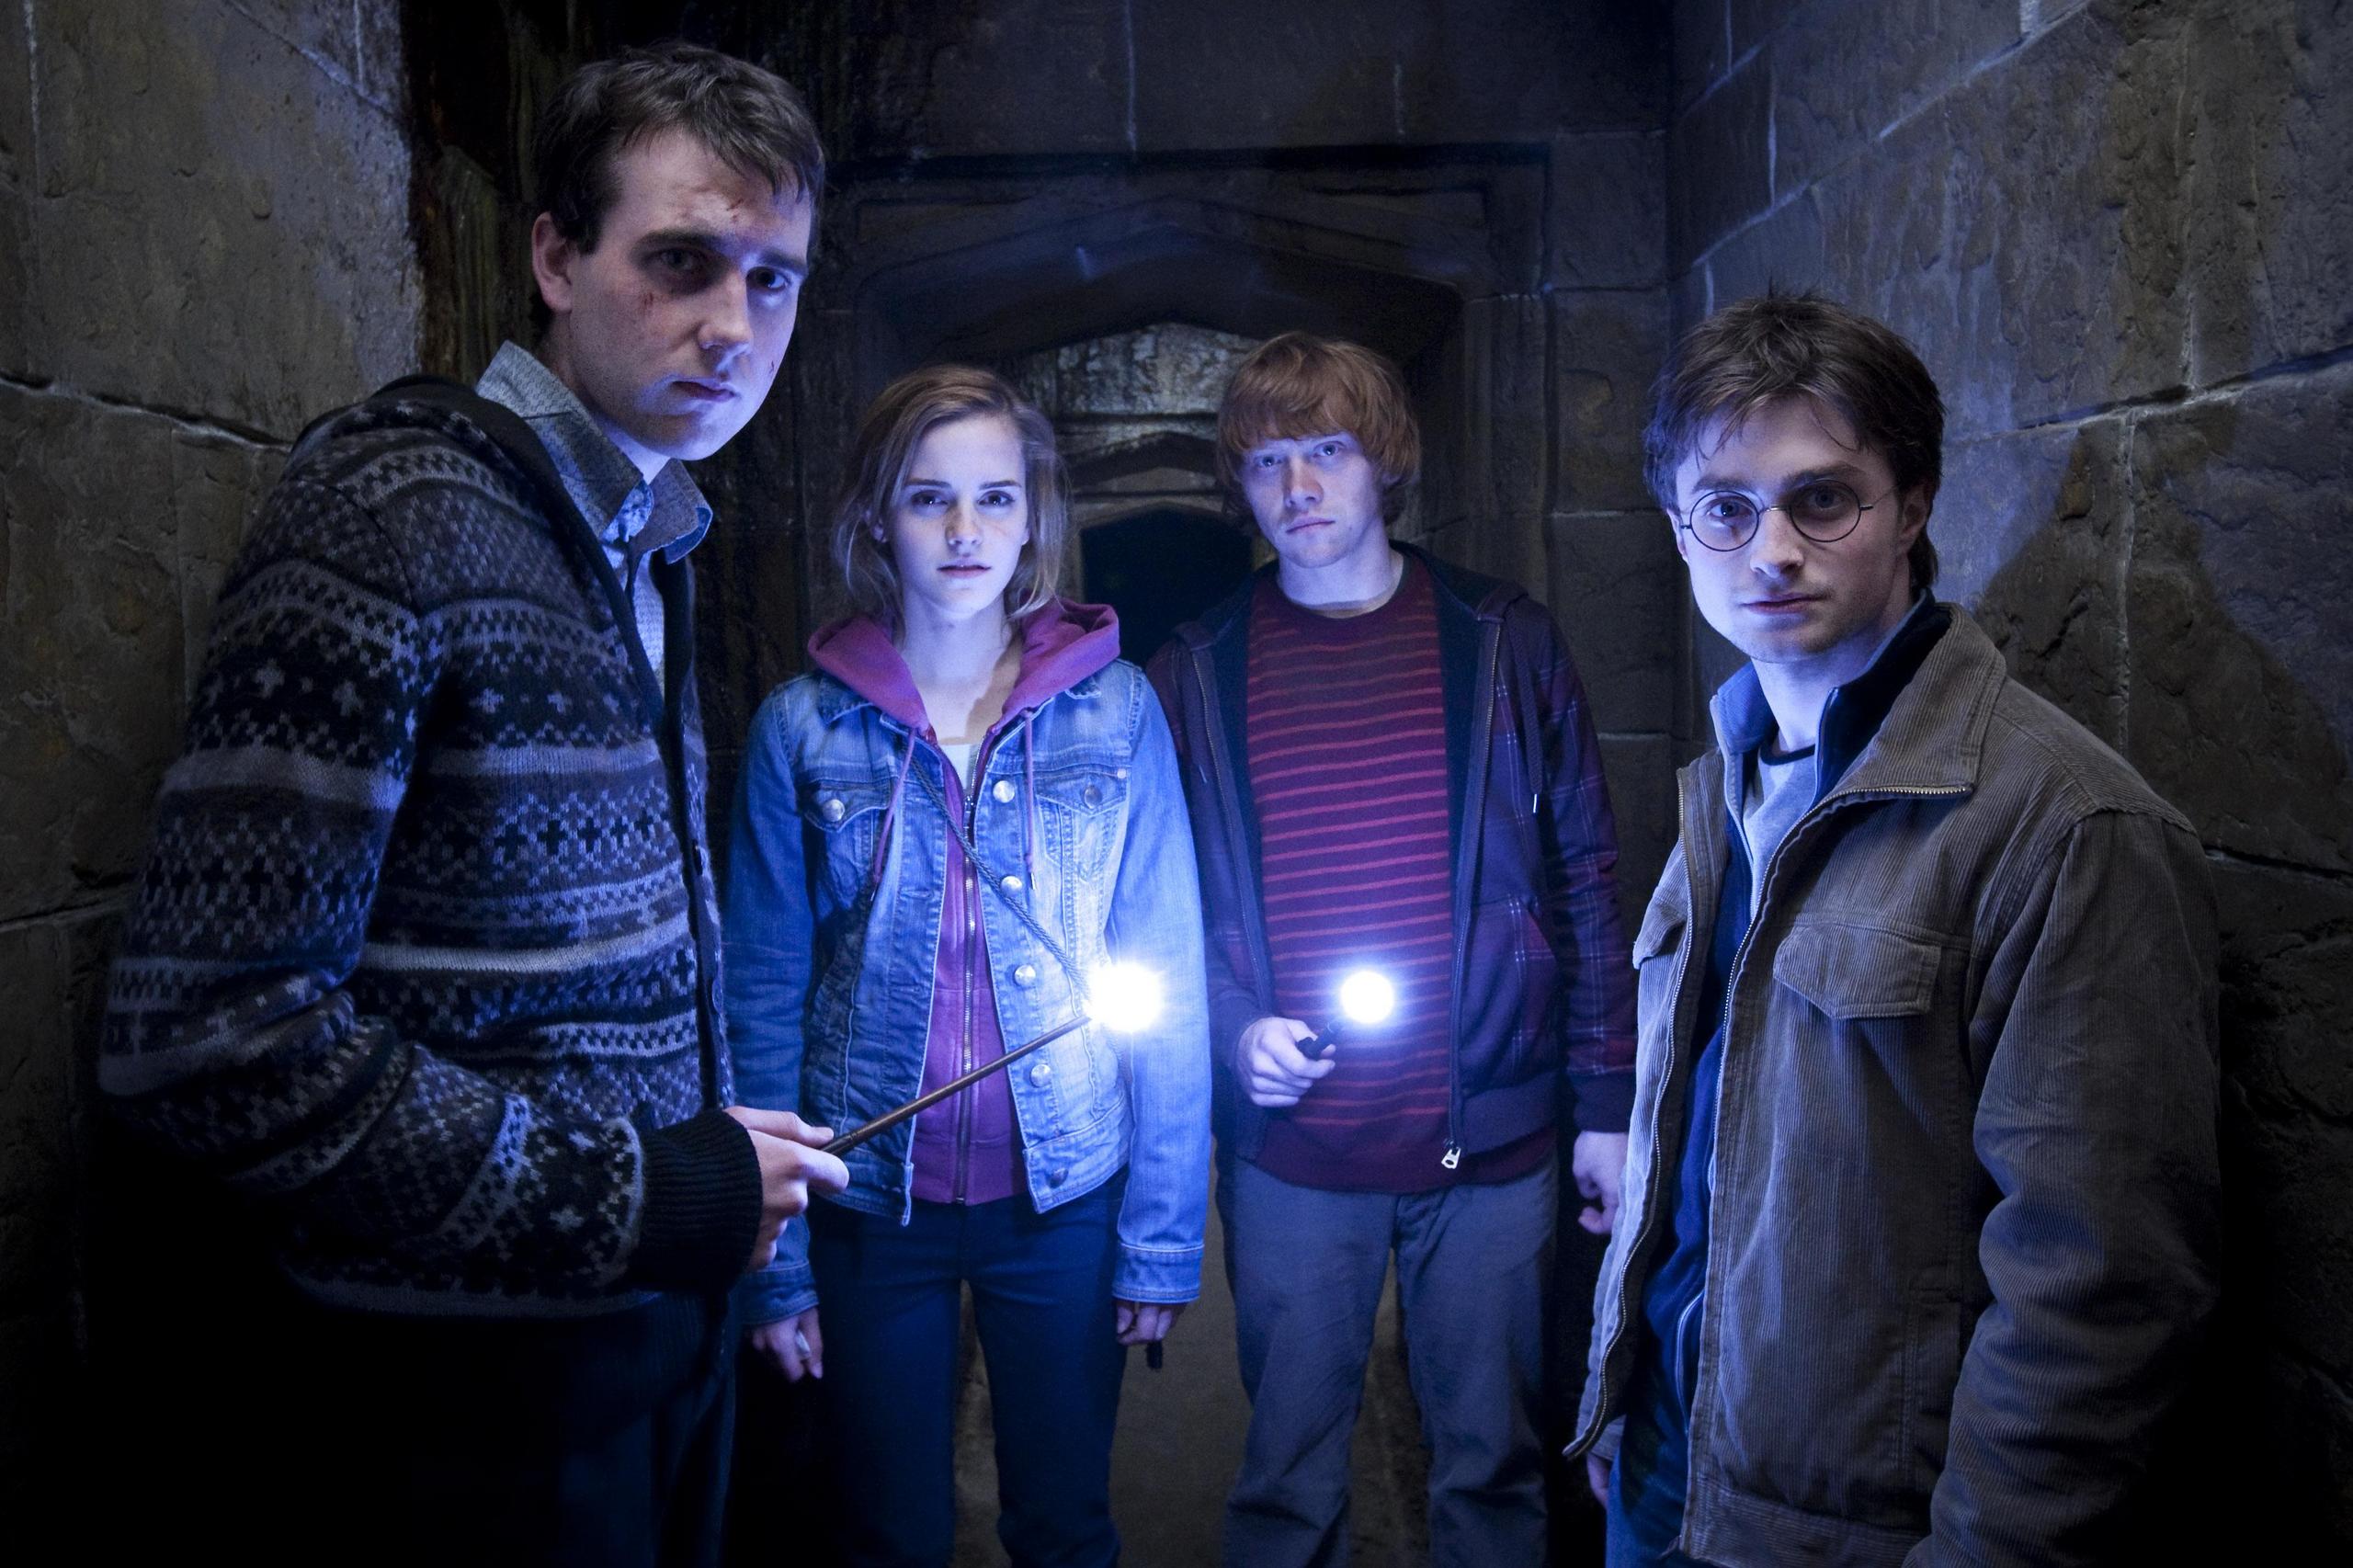 HARRY POTTER AND THE DEATHLY HALLOWS Ã PART 2